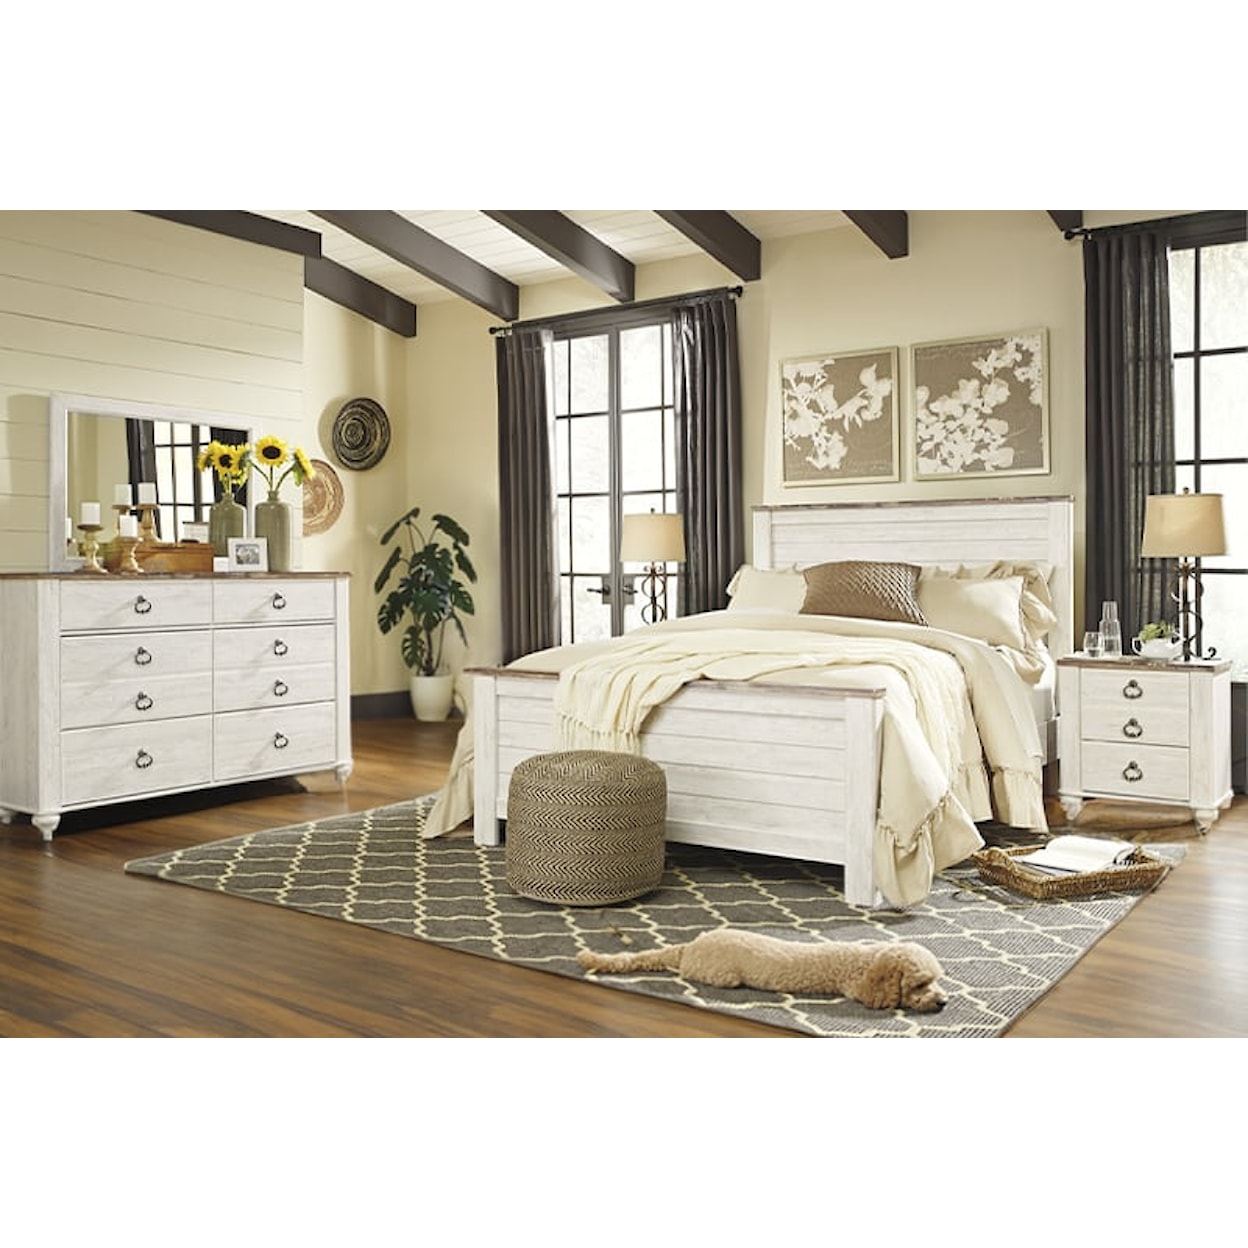 Signature Design by Ashley Willowton Queen 6-Piece Bedroom Group